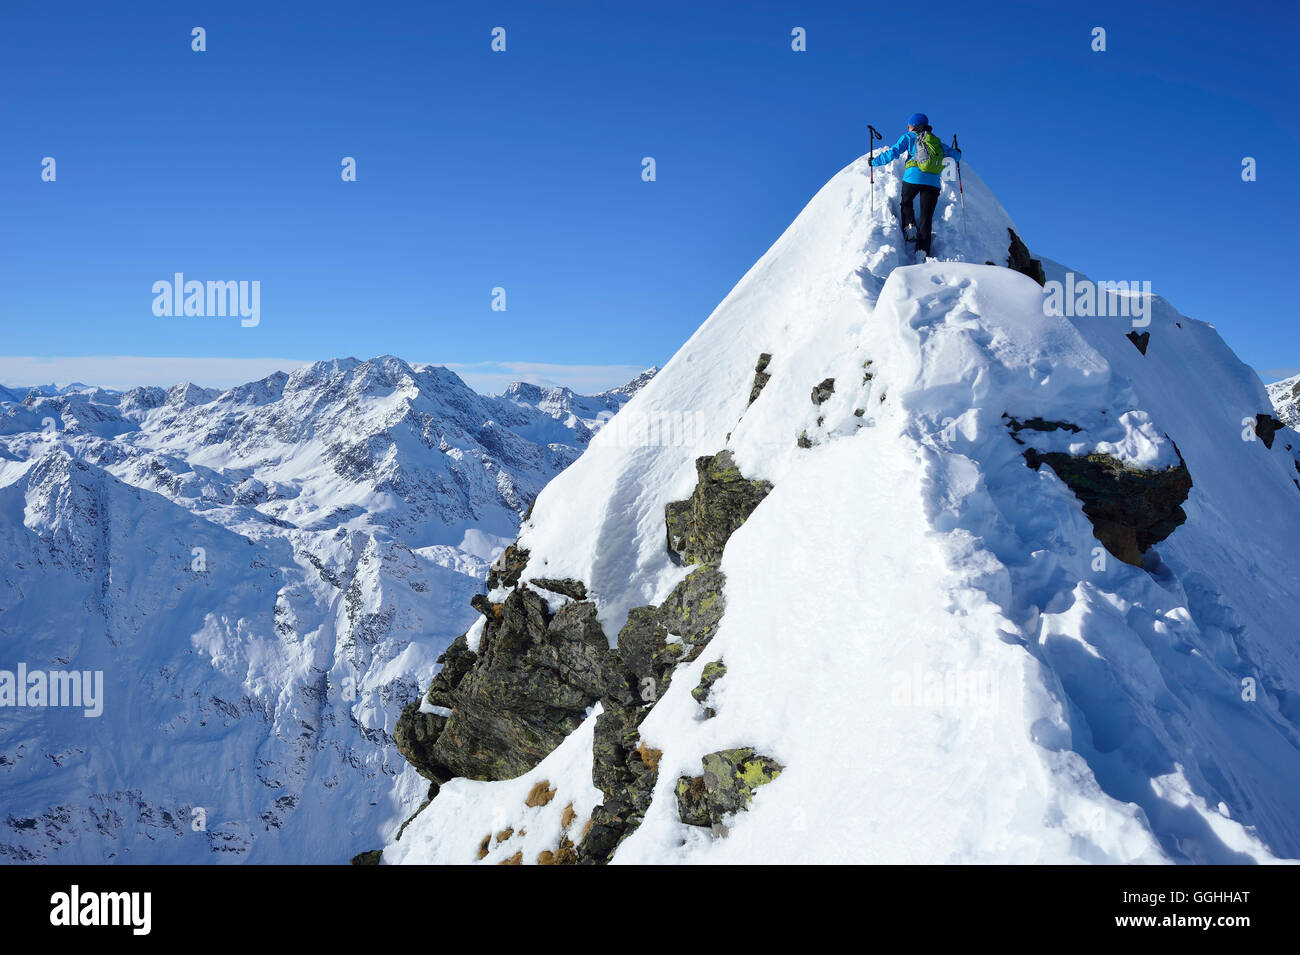 Female back-country skier ascending to Aeusseres Hocheck, Pflersch valley, Stubai Alps, South Tyrol, Italy Stock Photo